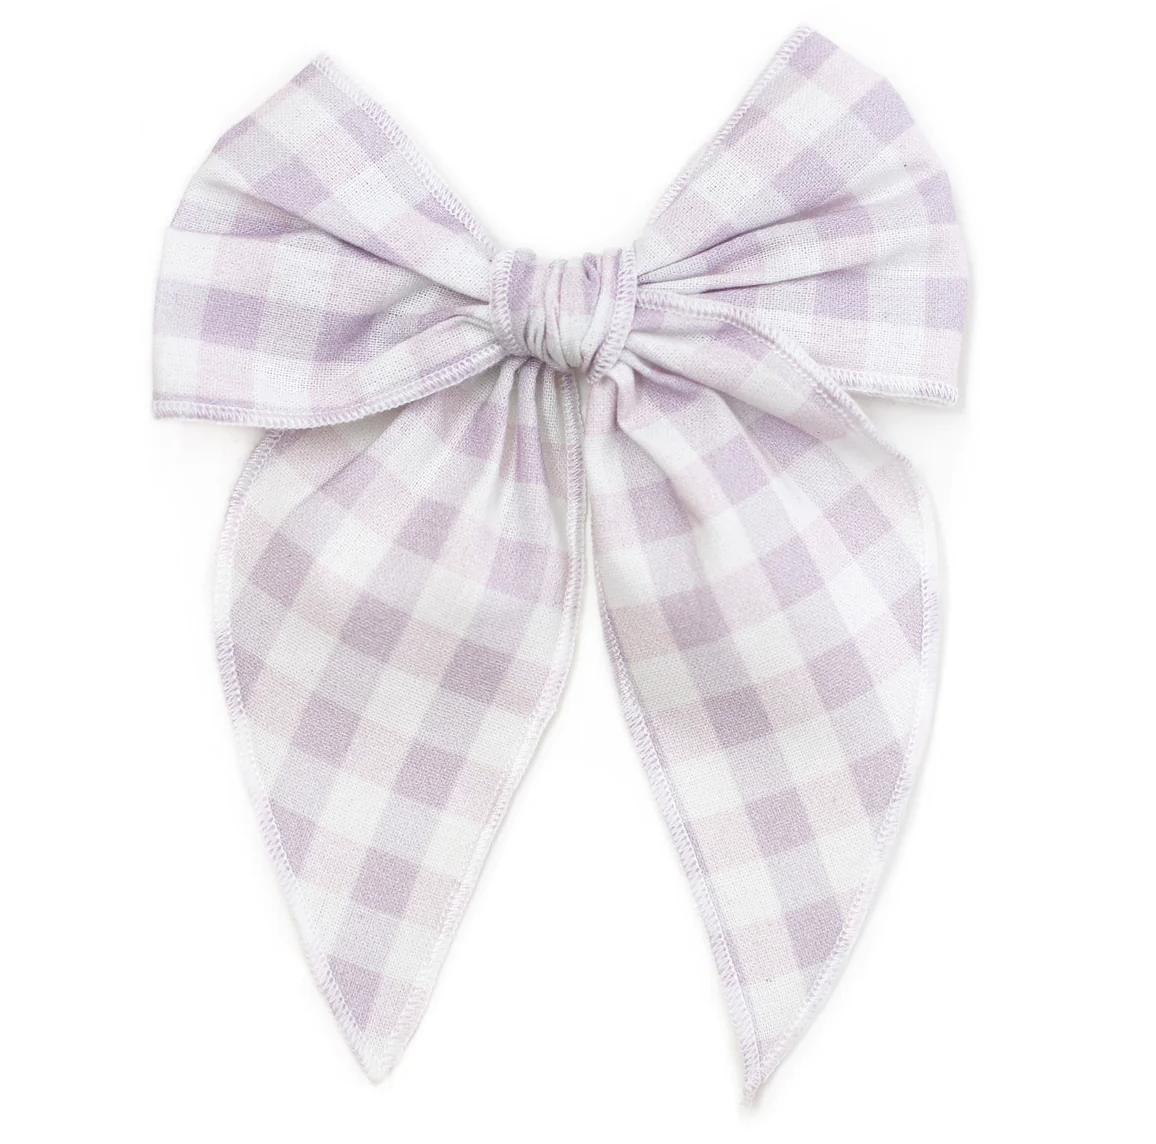 Party Girl Bow - Purple Gingham